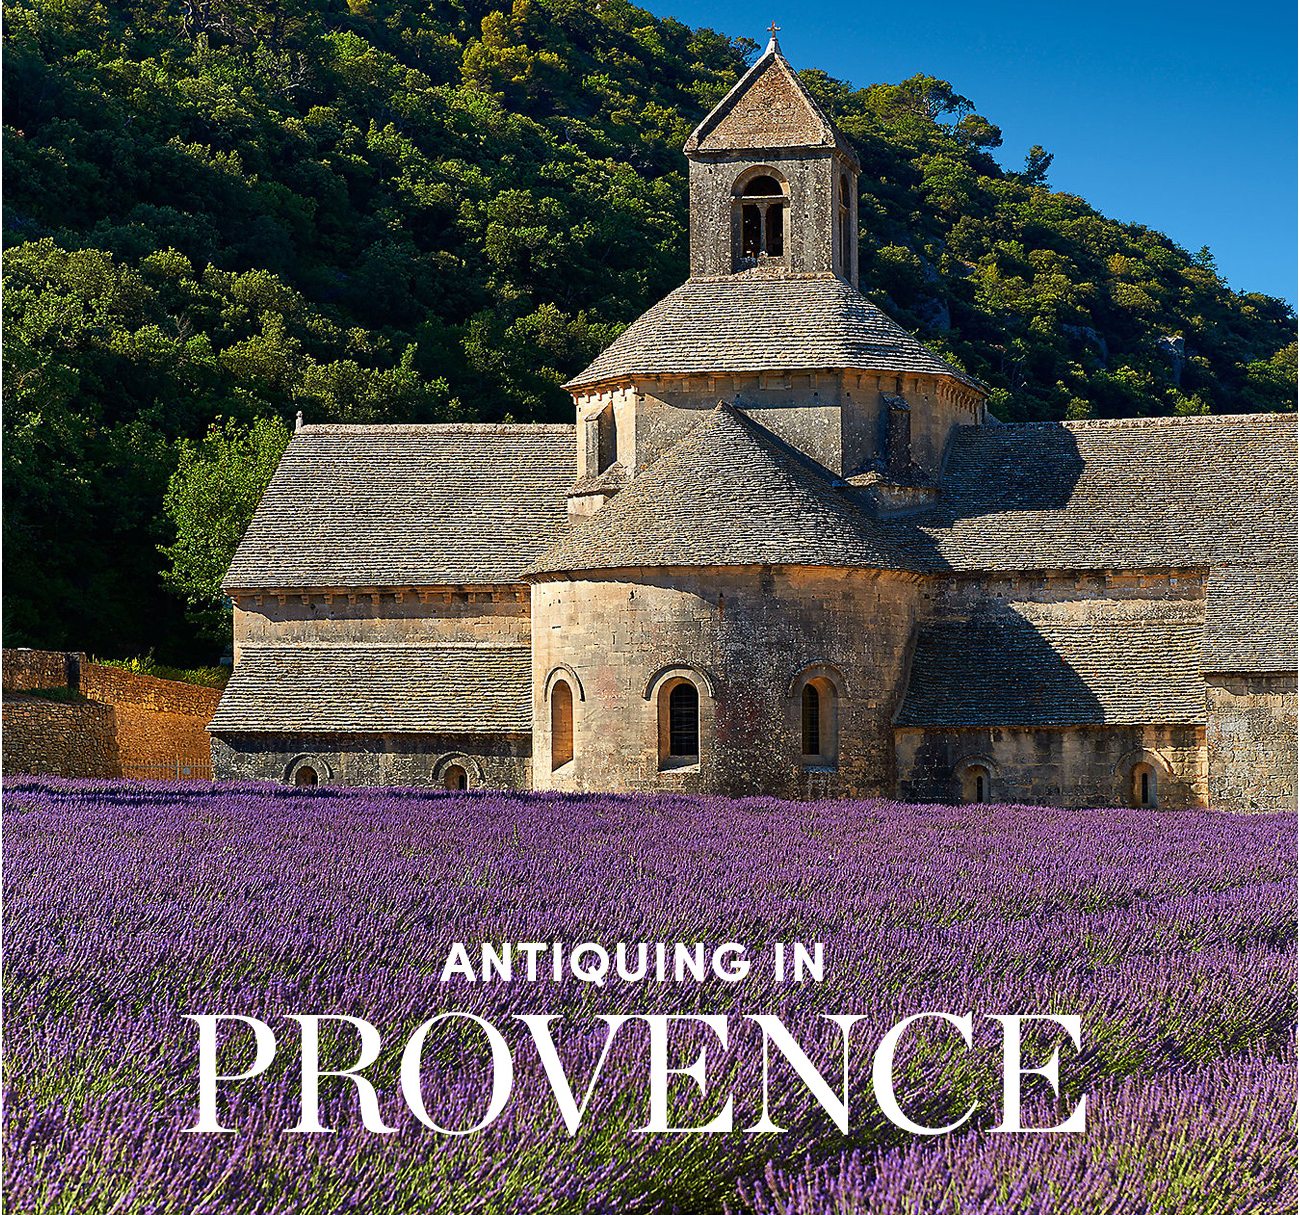 Antiquing in Provence